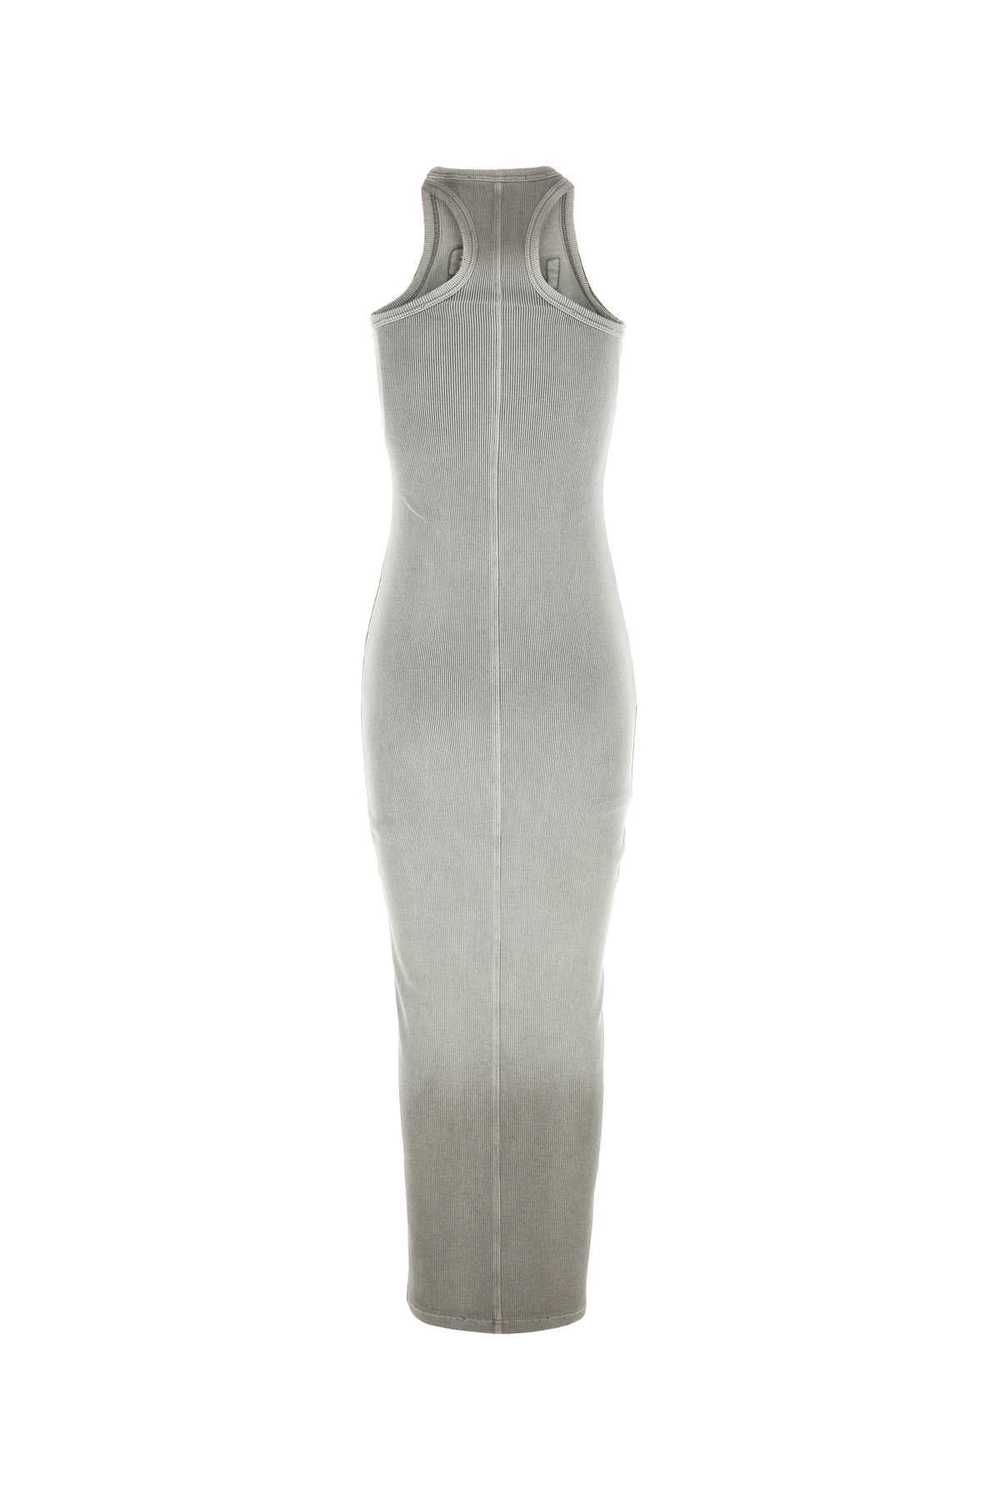 T by Alexander Wang Grey Stretch Cotton Dress - image 2